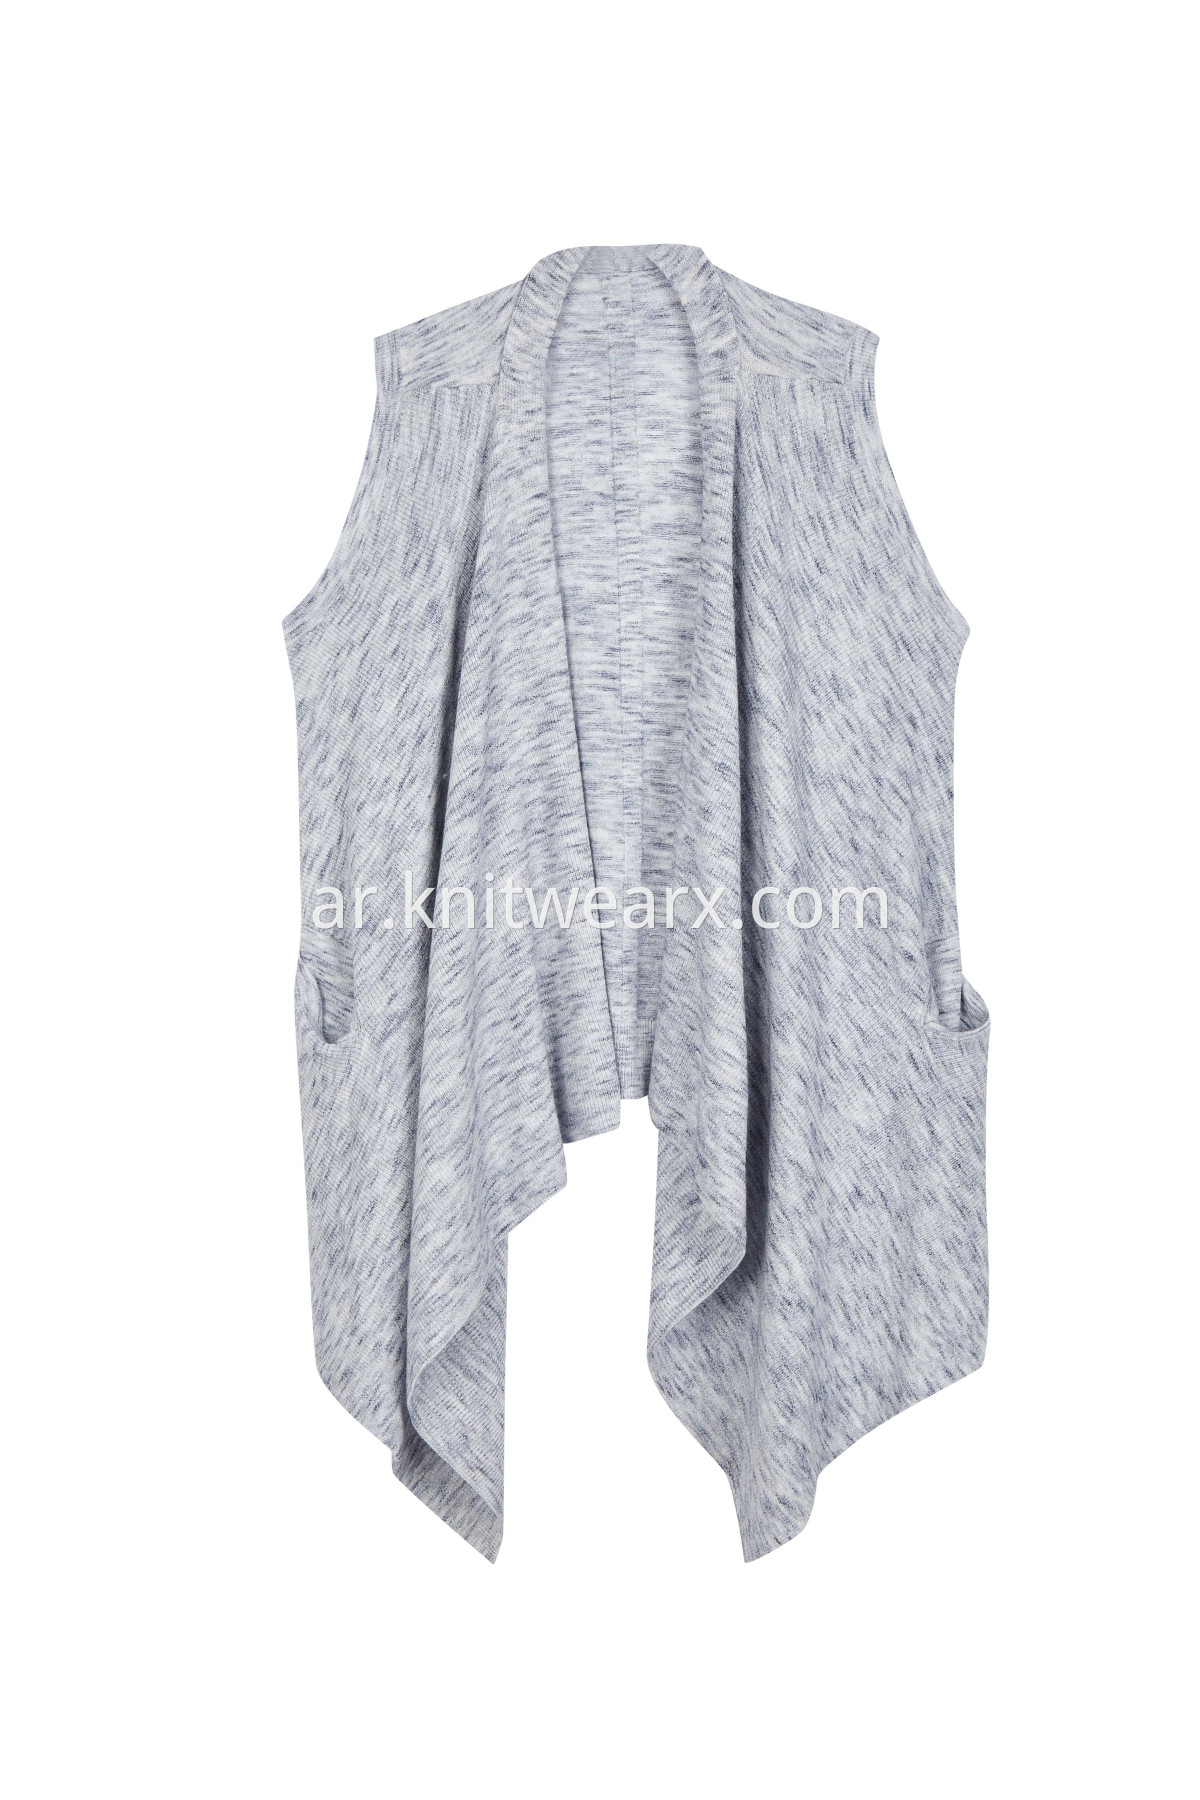 Women's Sleeveless Shawl Collar Wrap Knitted Cardigan with Pockets